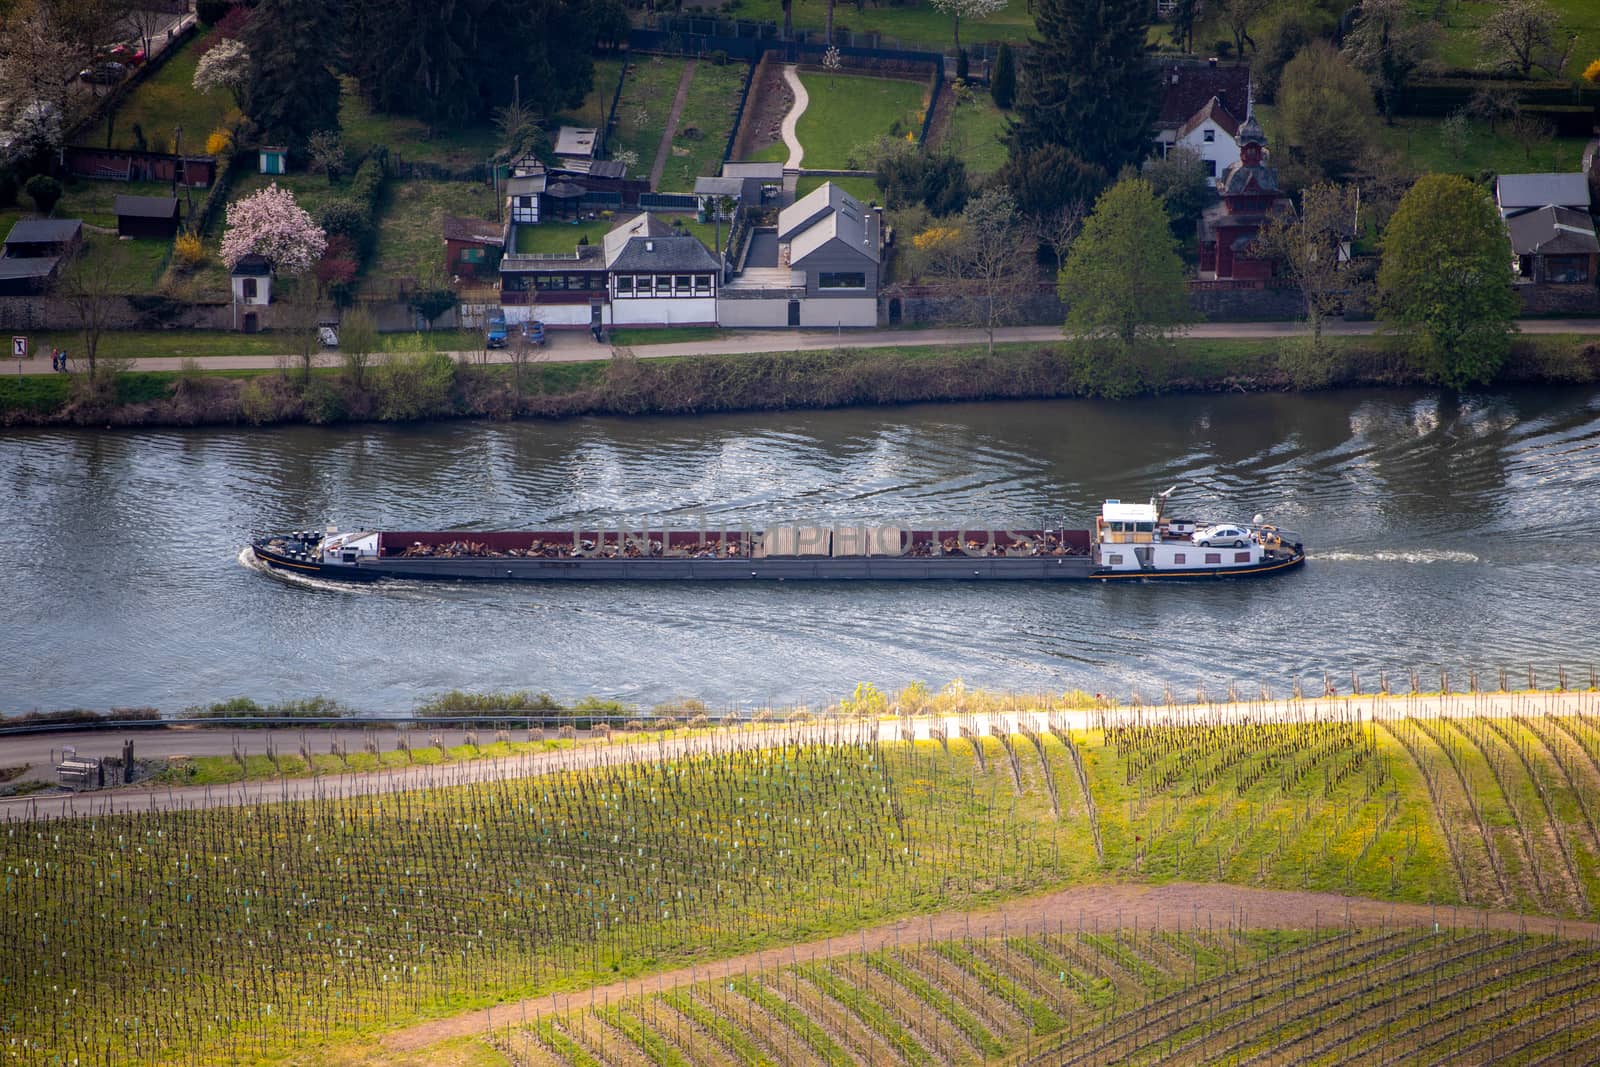 Cargo ship on the river Moselle, Germany by reinerc